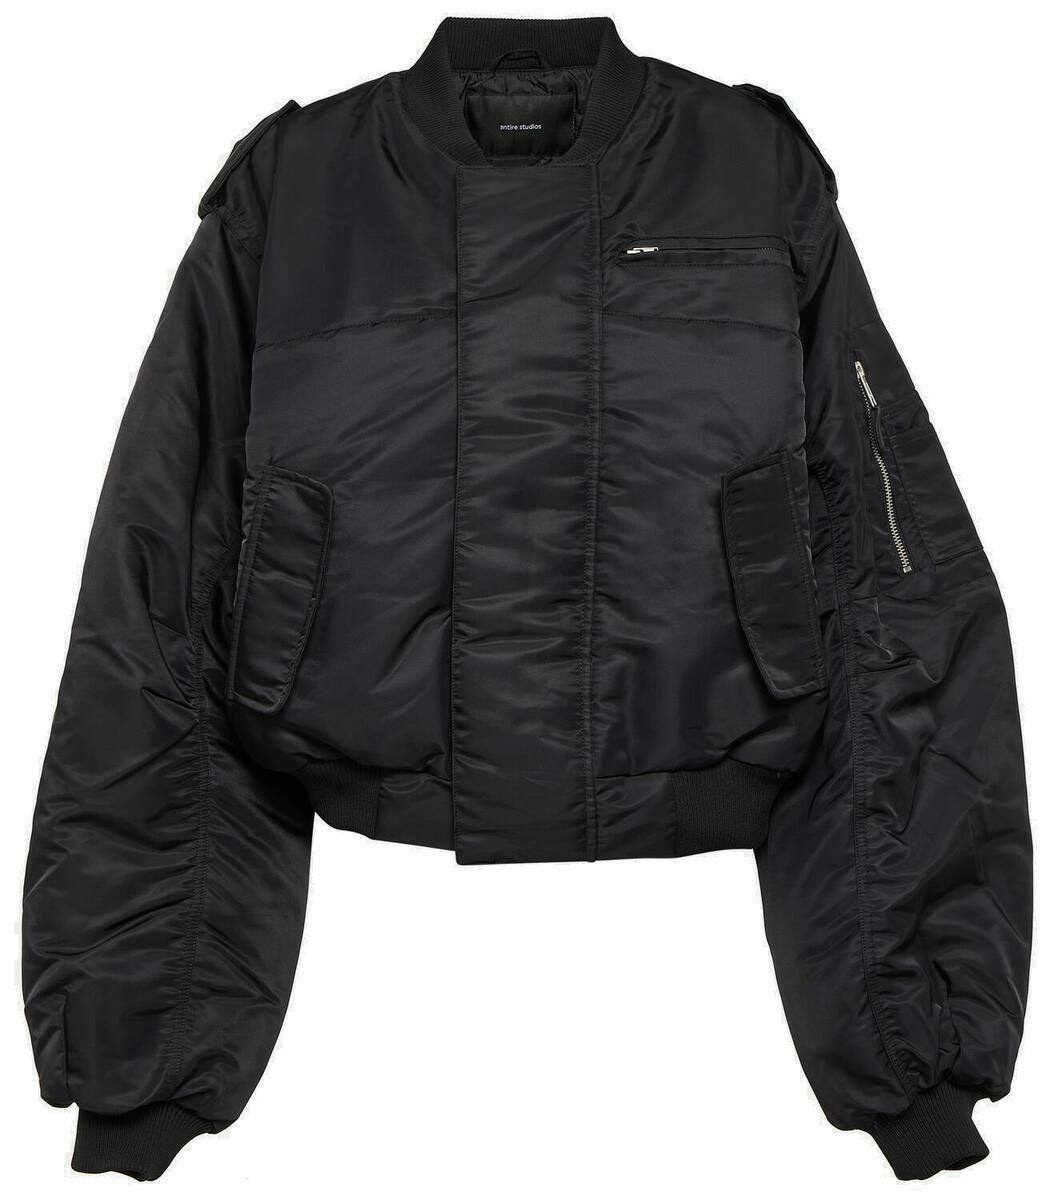 Entire Studios A-2 cropped bomber jacket